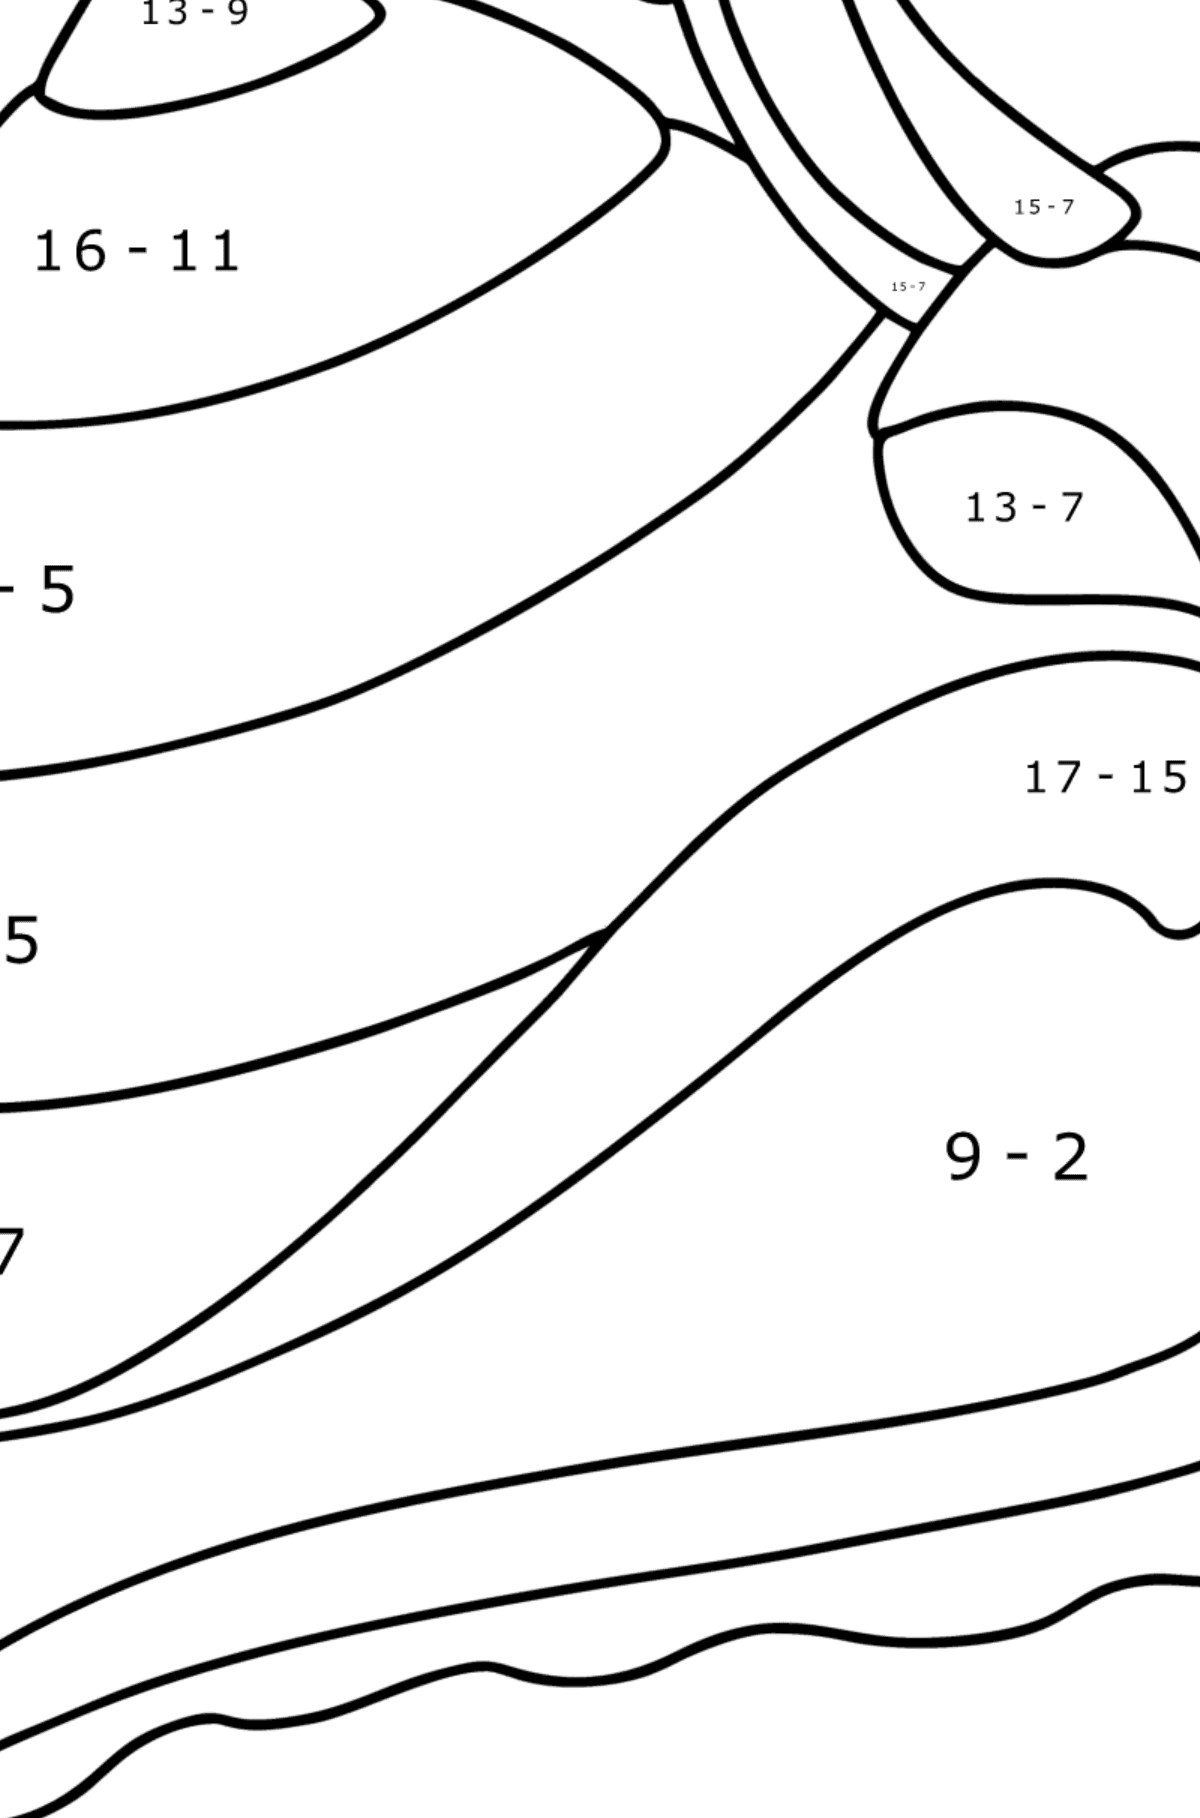 Snail coloring page - Math Coloring - Subtraction for Kids